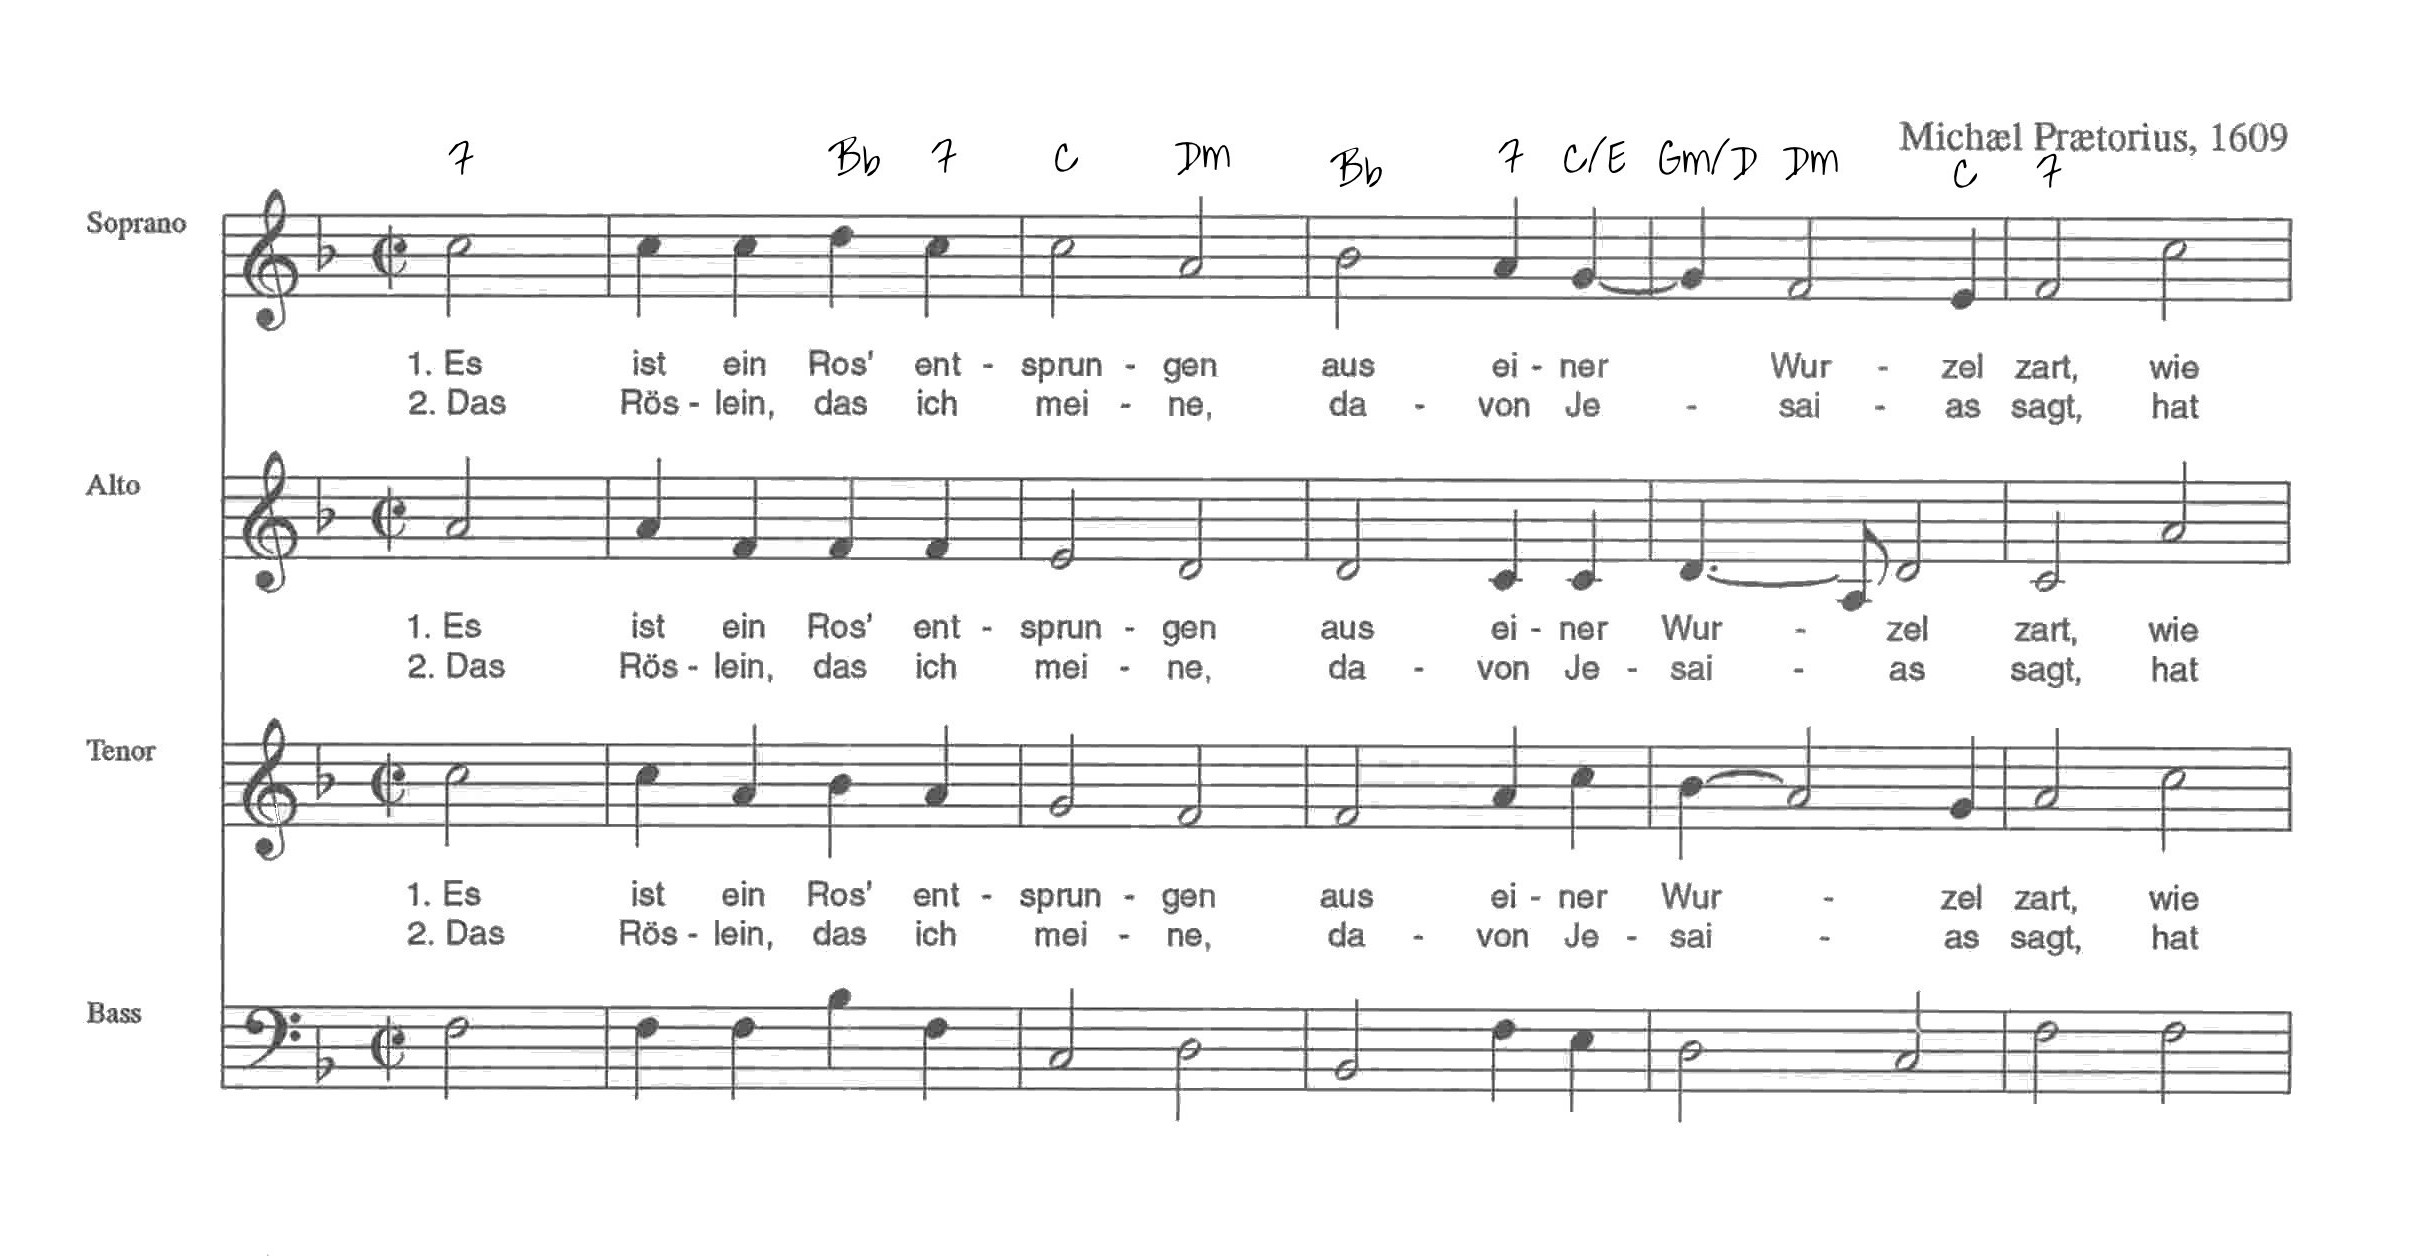 PlayScore 2 for Choir Directors and Singers - Make a Playable Rehearsal  Score 